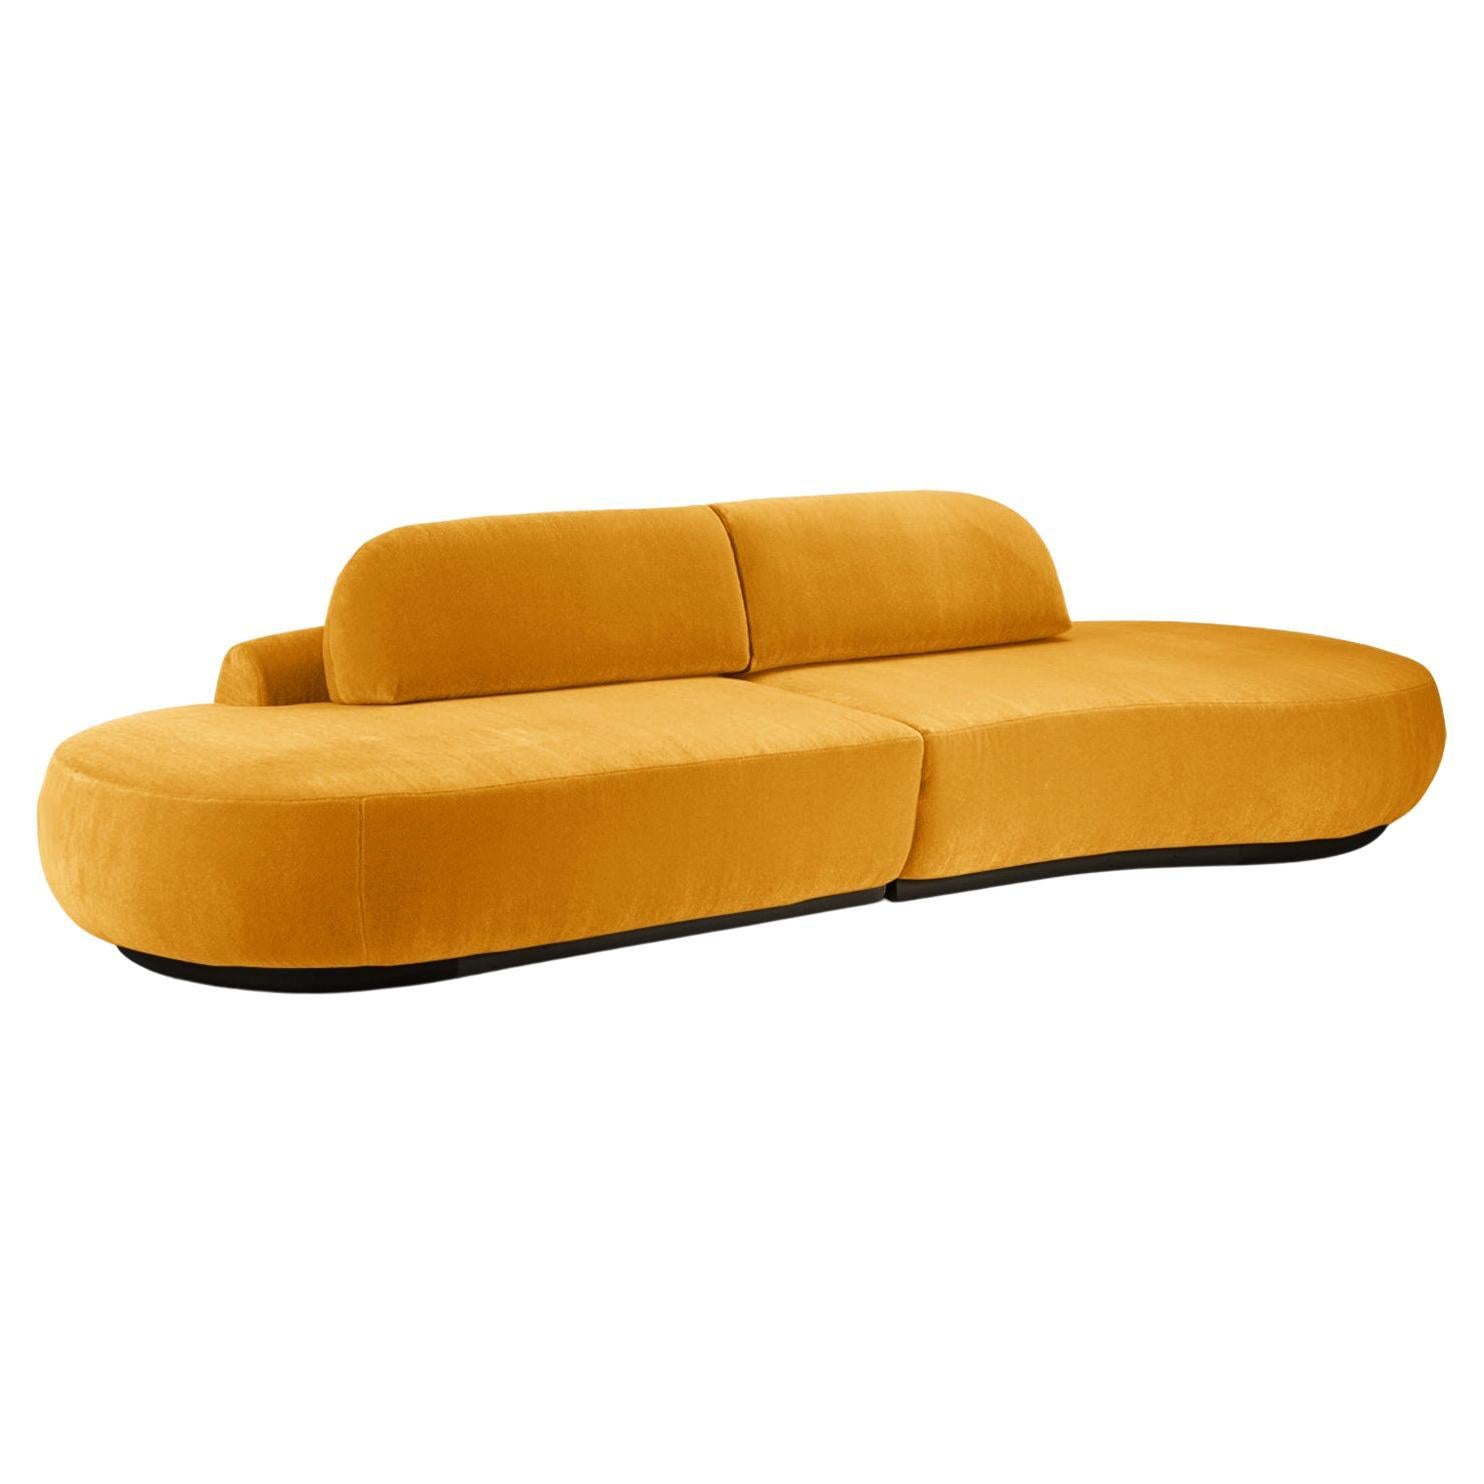 Naked Curved Sectional Sofa, 2 Piece with Beech Ash-056-5 and Corn For Sale